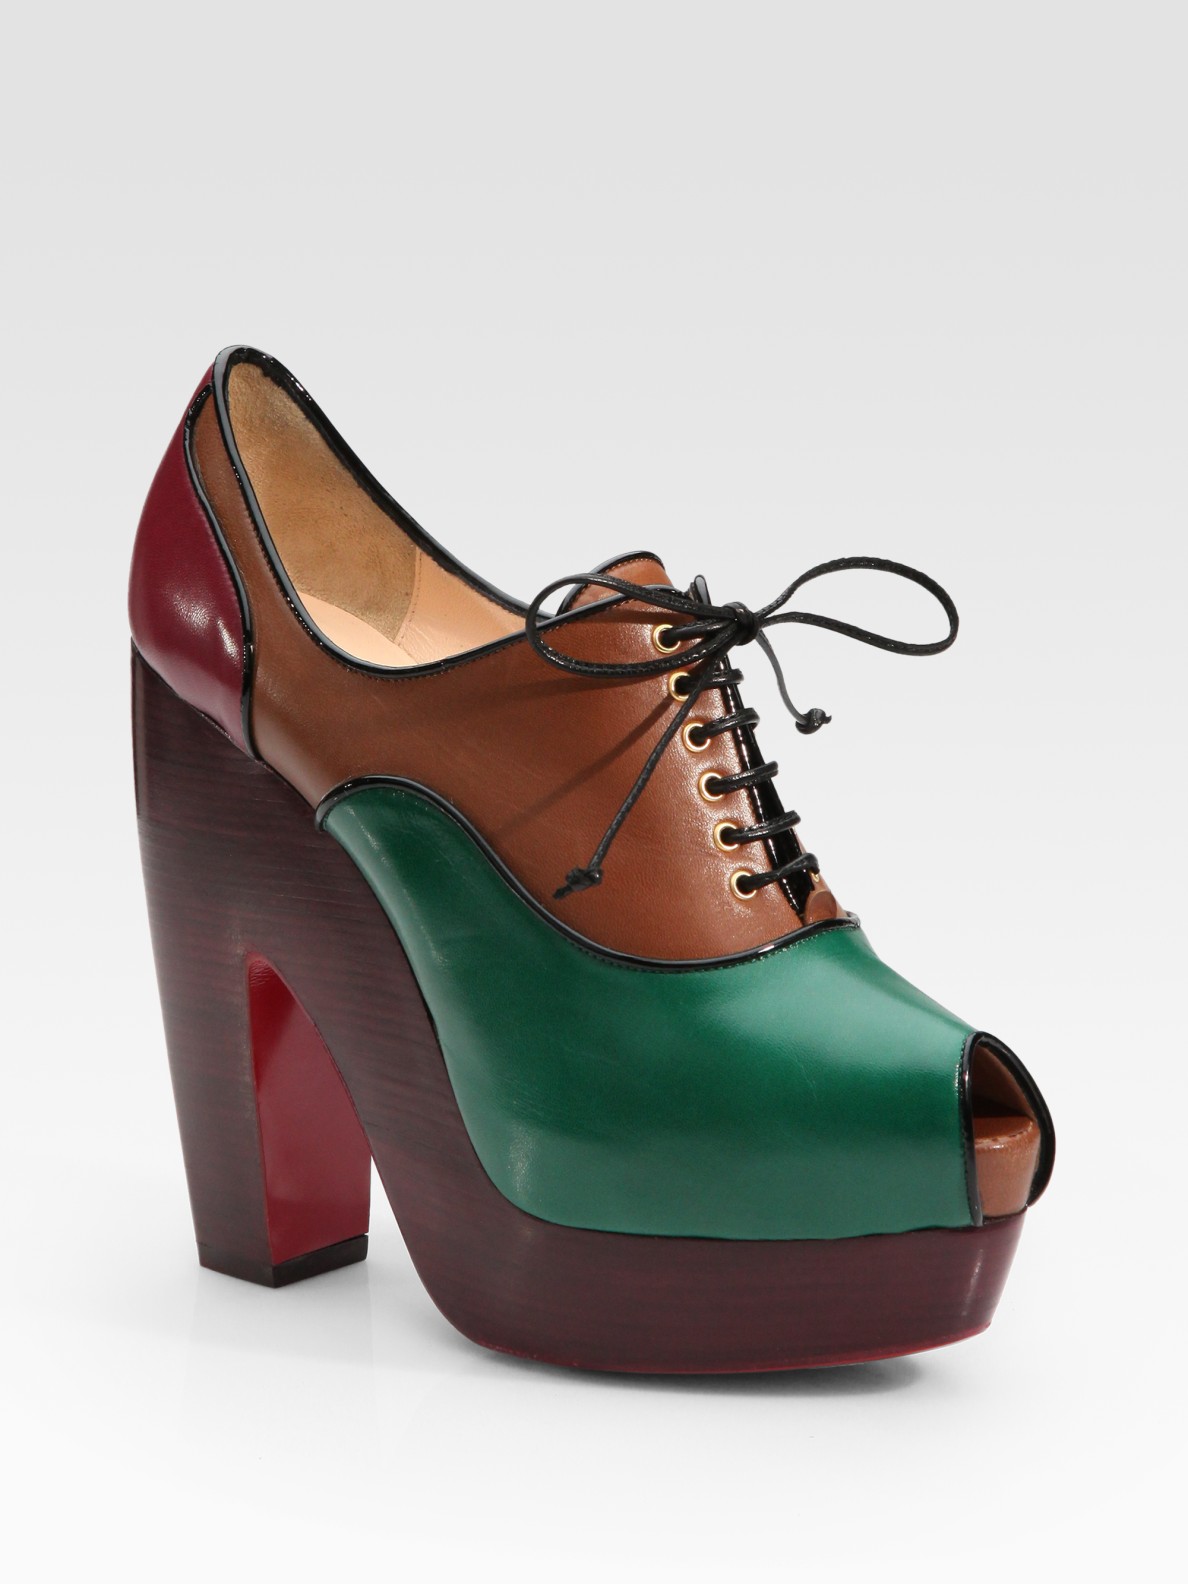 louis vuitton shoes fake - Christian louboutin Leather Lace-up Colorblock Peep Toe Ankle ...